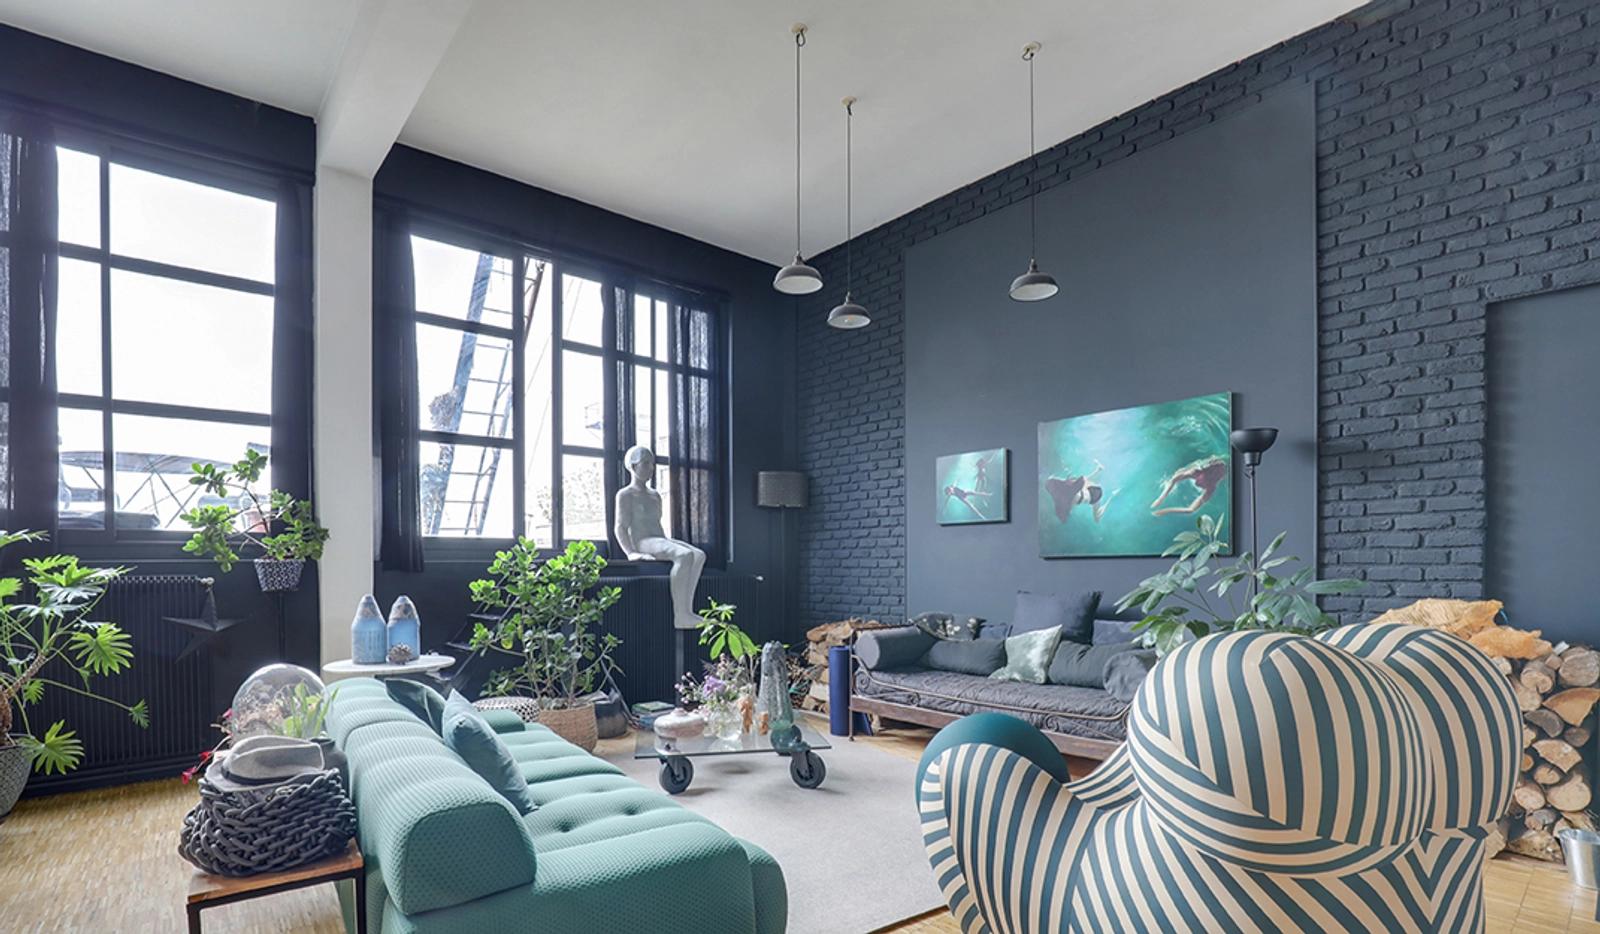 Space Spacious and bright arty loft, New York style - 2